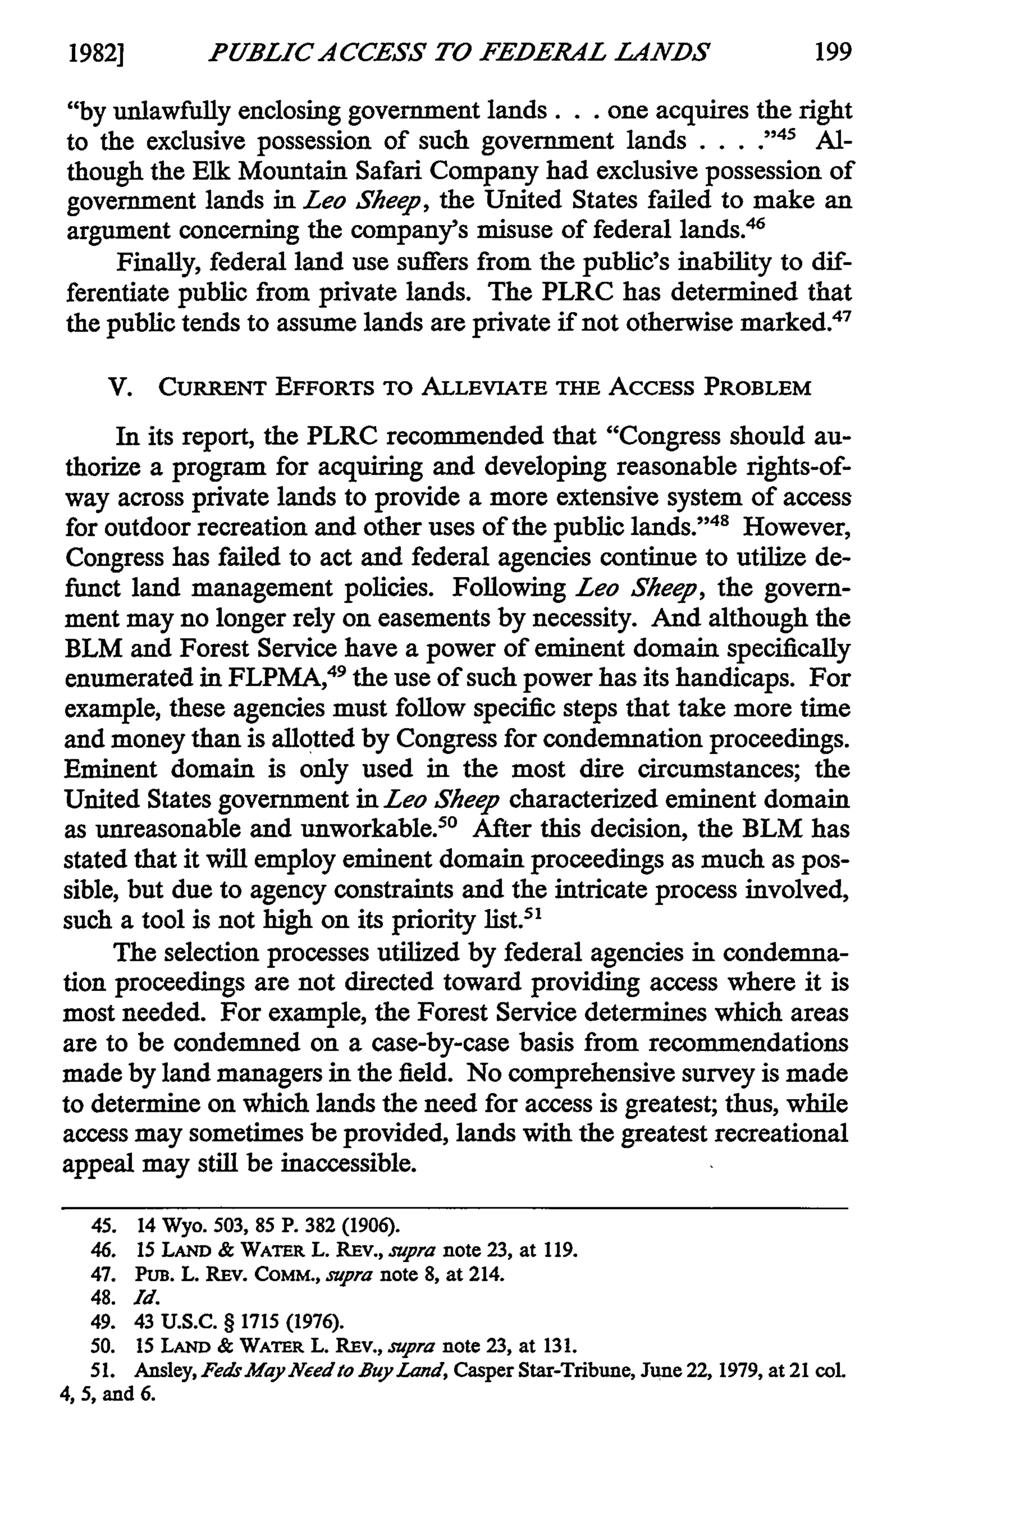 1982] PUBLICACCESS TO FEDERAL LANDS "by unlawfully enclosing government lands.. one acquires the right to the exclusive possession of such government lands.